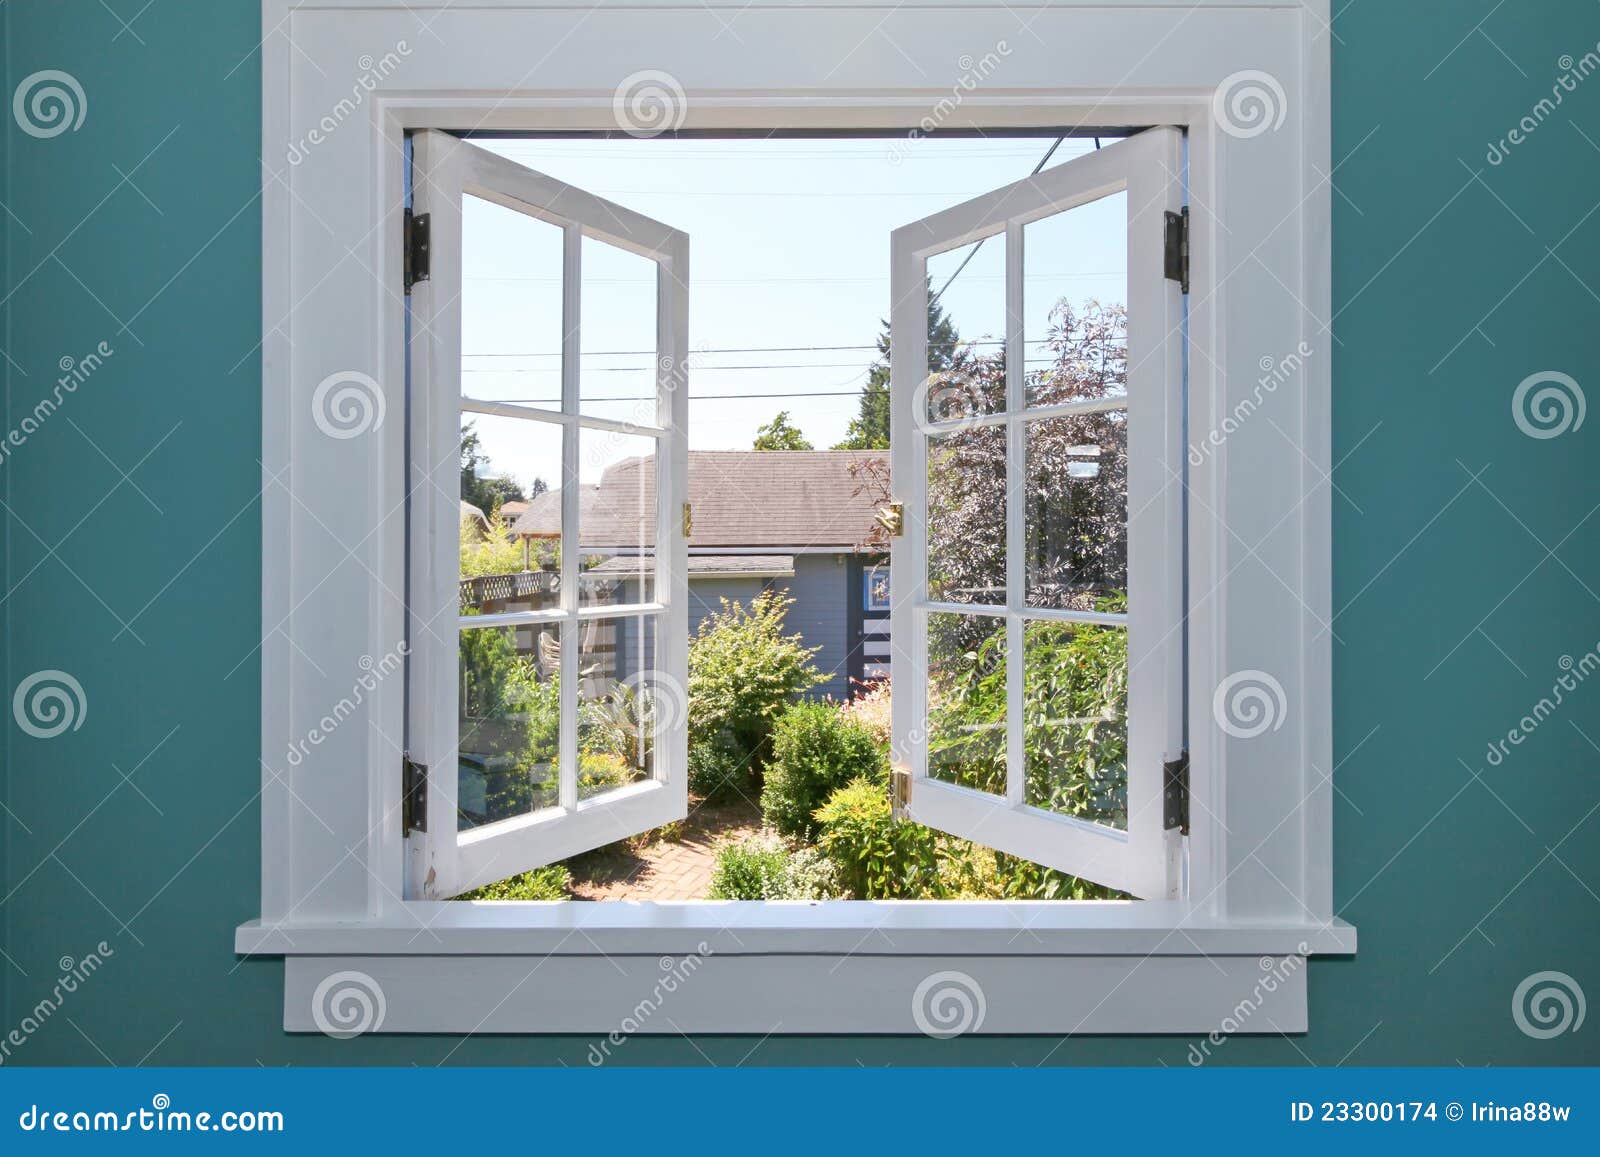 open window to the back yard with small shed. stock images